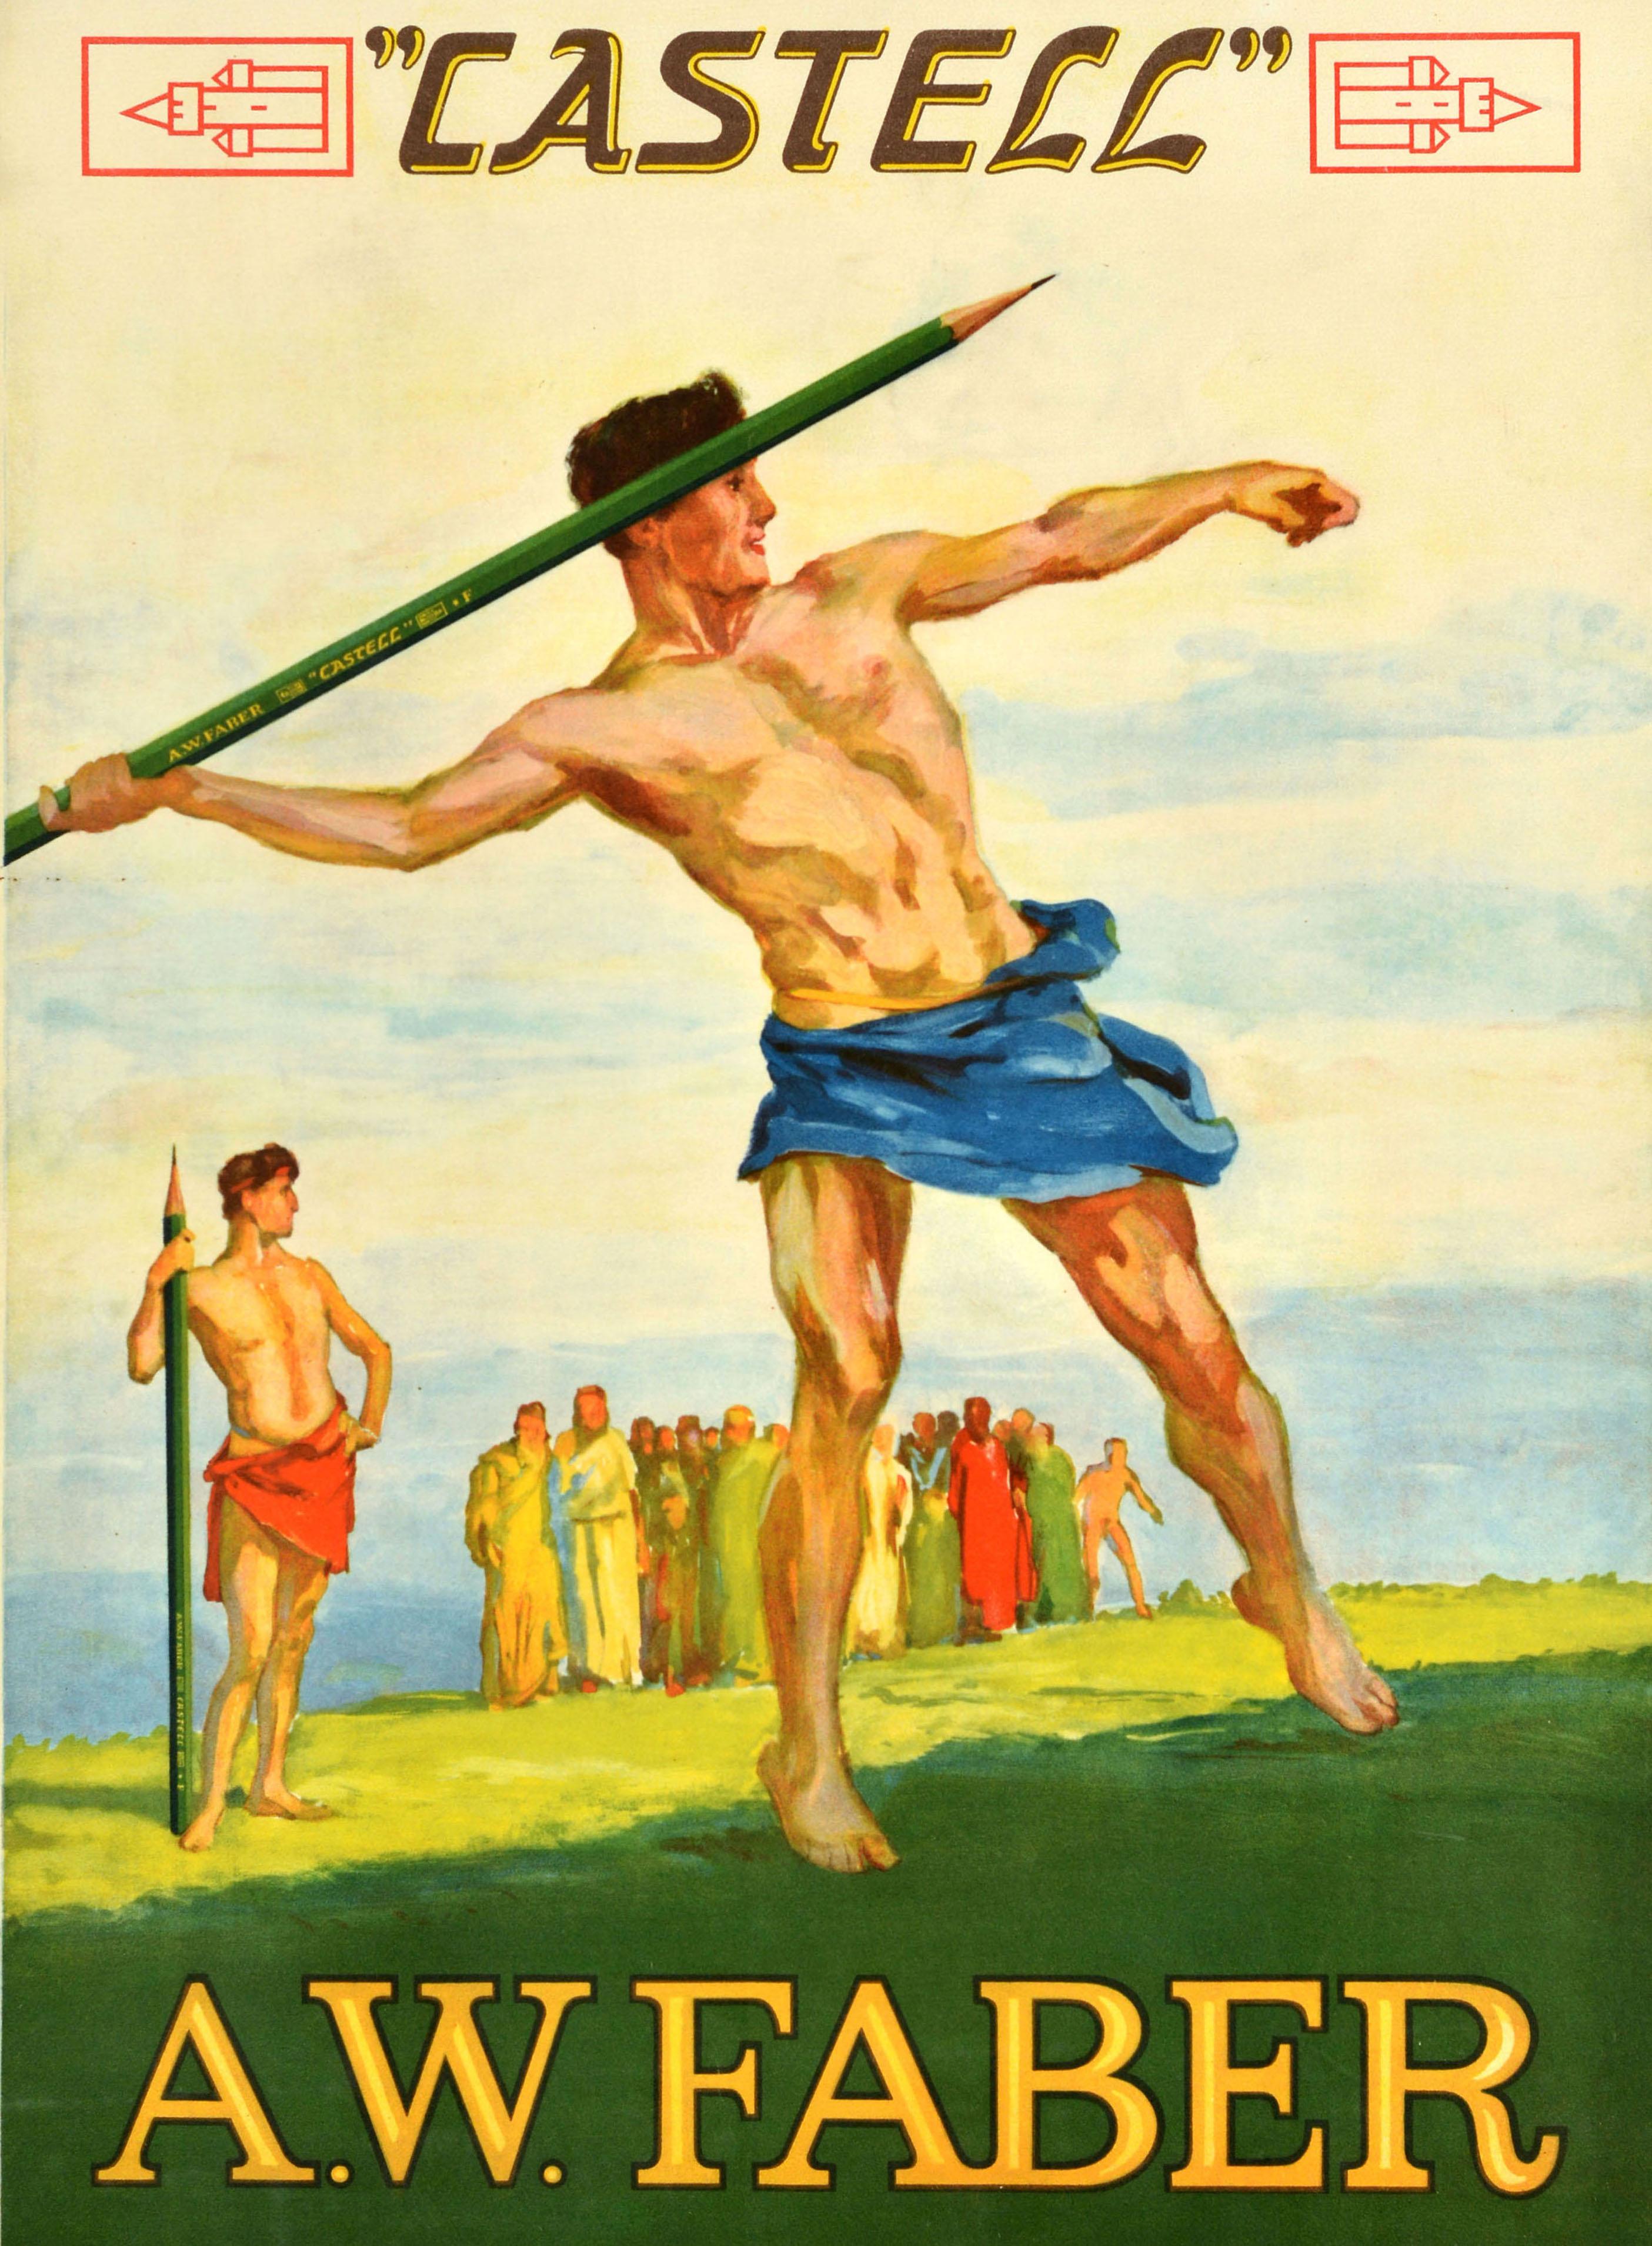 Original antique advertising poster for Castell A.W. Faber stationery supplies featuring a young athlete throwing a green AW Faber pencil as a javelin with another javelin thrower and spectators watching the background, all dressed in ancient toga